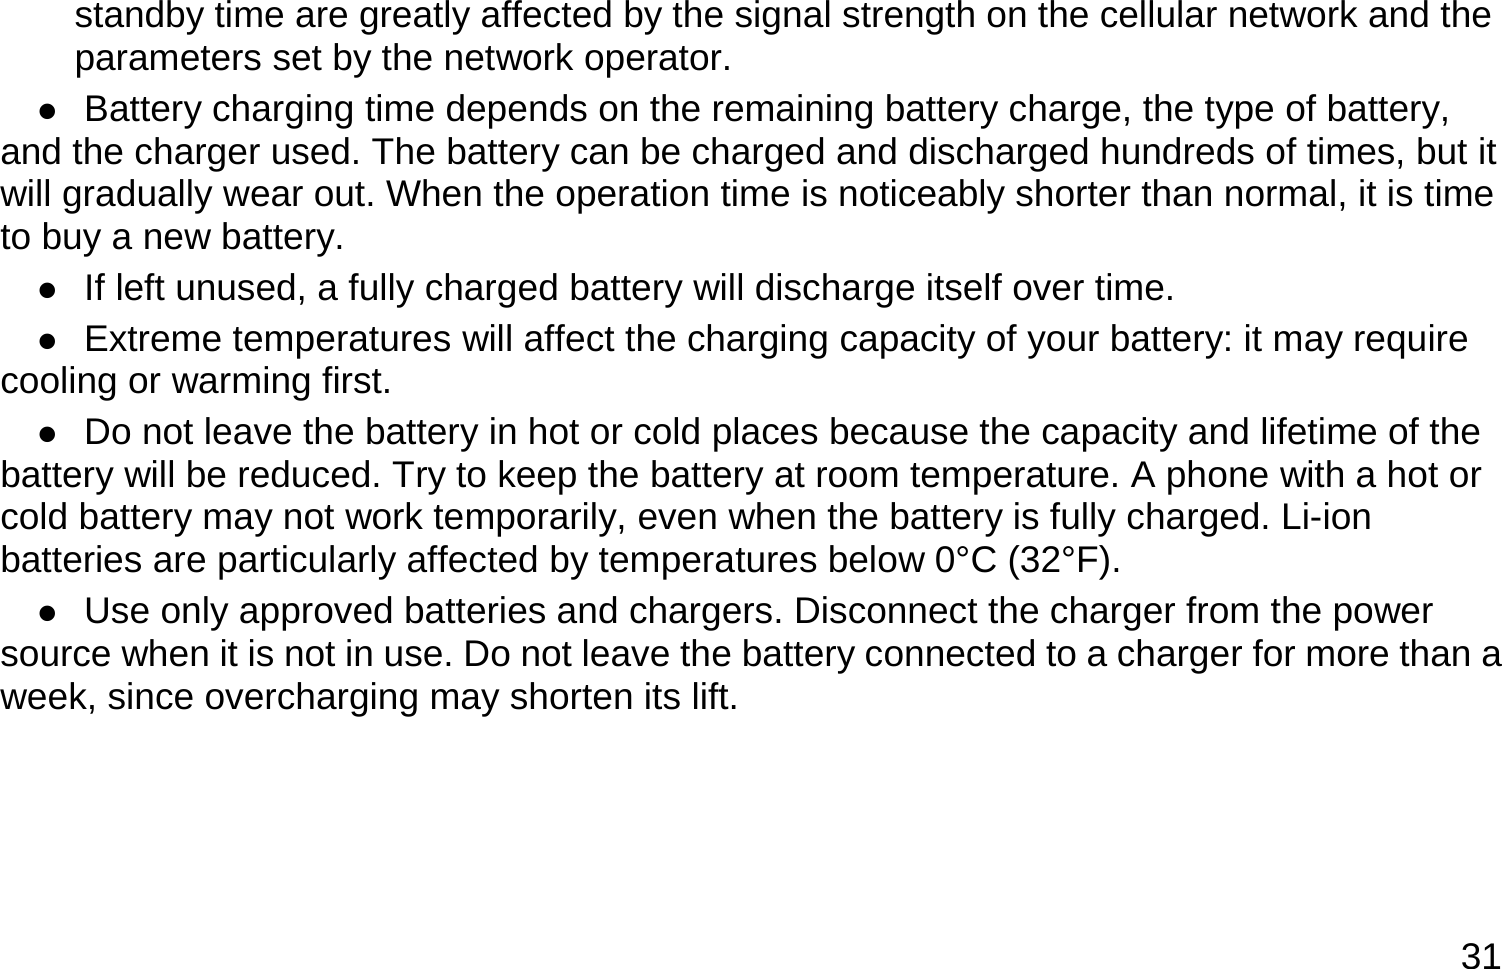  31 standby time are greatly affected by the signal strength on the cellular network and the parameters set by the network operator.  Battery charging time depends on the remaining battery charge, the type of battery, and the charger used. The battery can be charged and discharged hundreds of times, but it will gradually wear out. When the operation time is noticeably shorter than normal, it is time to buy a new battery.  If left unused, a fully charged battery will discharge itself over time.  Extreme temperatures will affect the charging capacity of your battery: it may require cooling or warming first.  Do not leave the battery in hot or cold places because the capacity and lifetime of the battery will be reduced. Try to keep the battery at room temperature. A phone with a hot or cold battery may not work temporarily, even when the battery is fully charged. Li-ion batteries are particularly affected by temperatures below 0°C (32°F).  Use only approved batteries and chargers. Disconnect the charger from the power source when it is not in use. Do not leave the battery connected to a charger for more than a week, since overcharging may shorten its lift.     